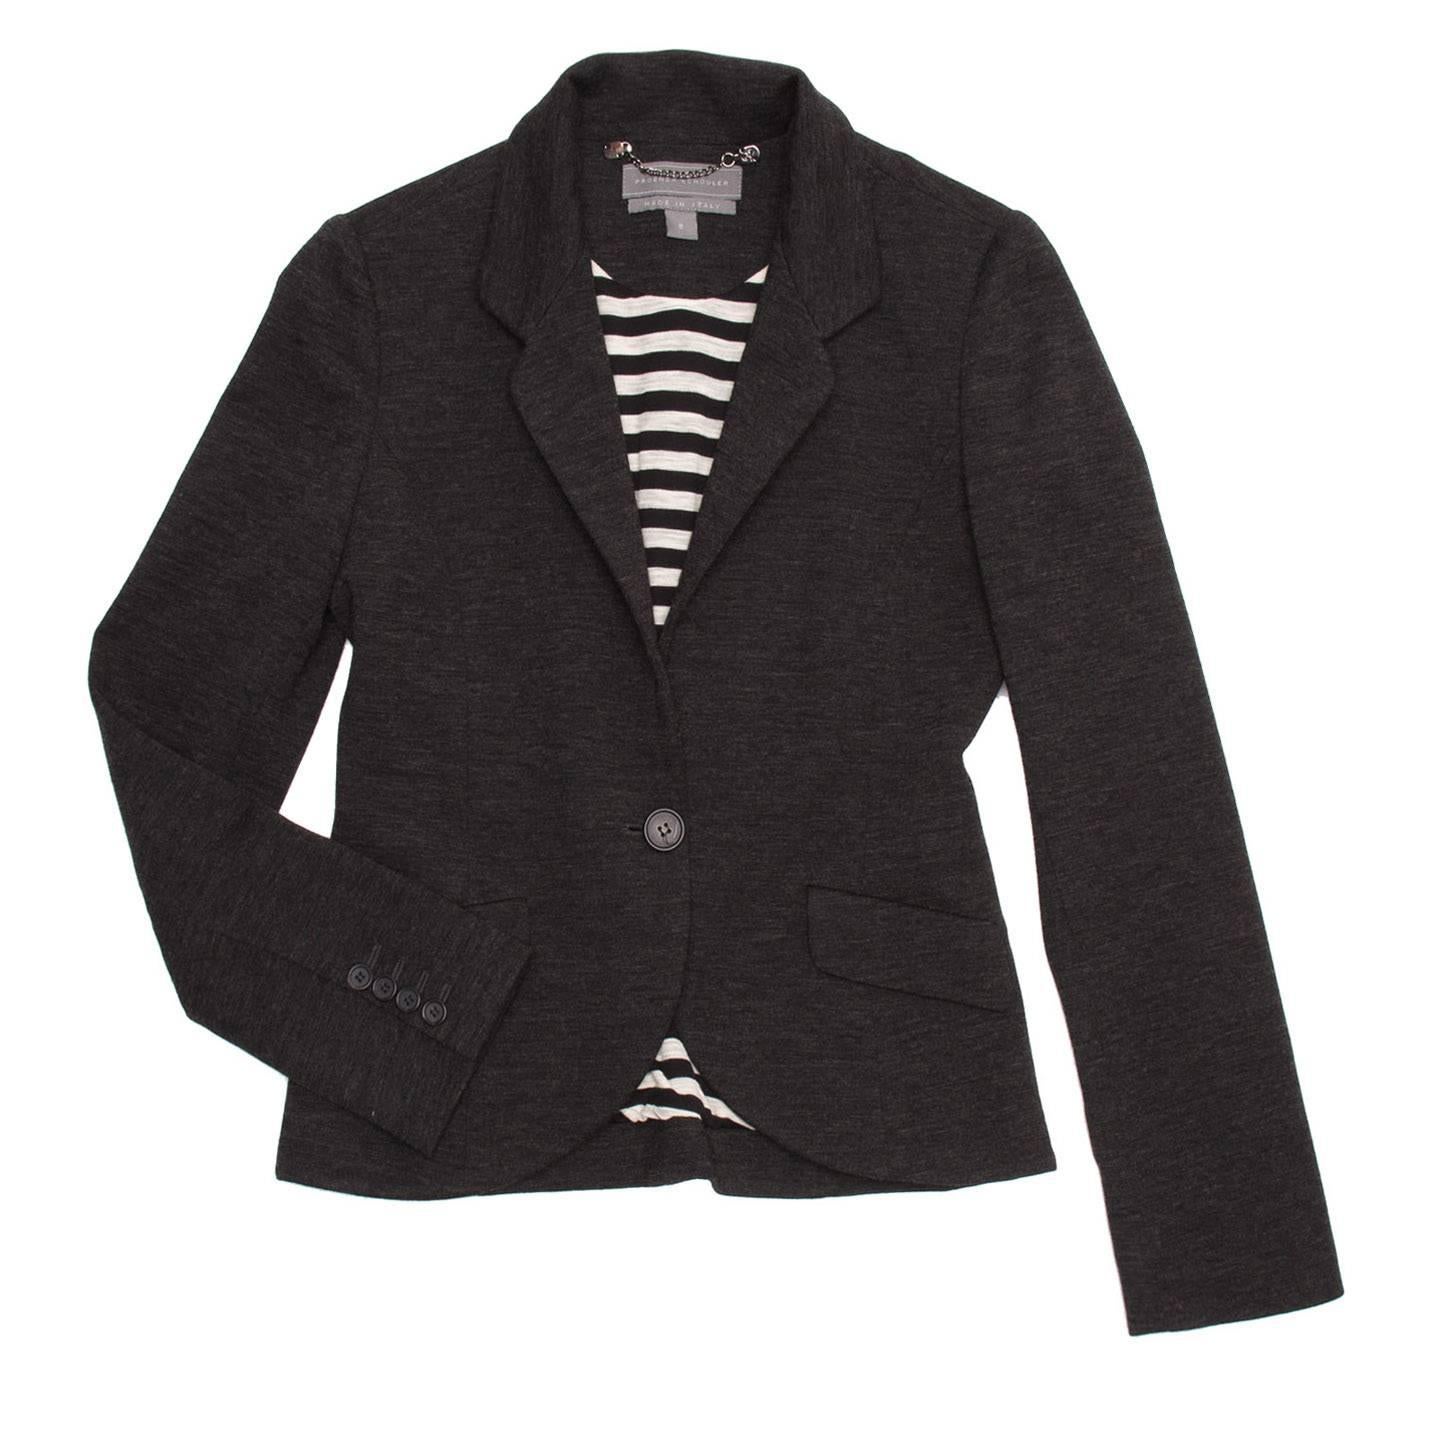 Charcoal heathered knit 1 buttoned blazer. 2 pocket flaps at front and 4 buttons at back cuff. Heathered horizontal stripe lining and small chain haner loop.

Size  8 US sizing

Condition  Excellent: never worn